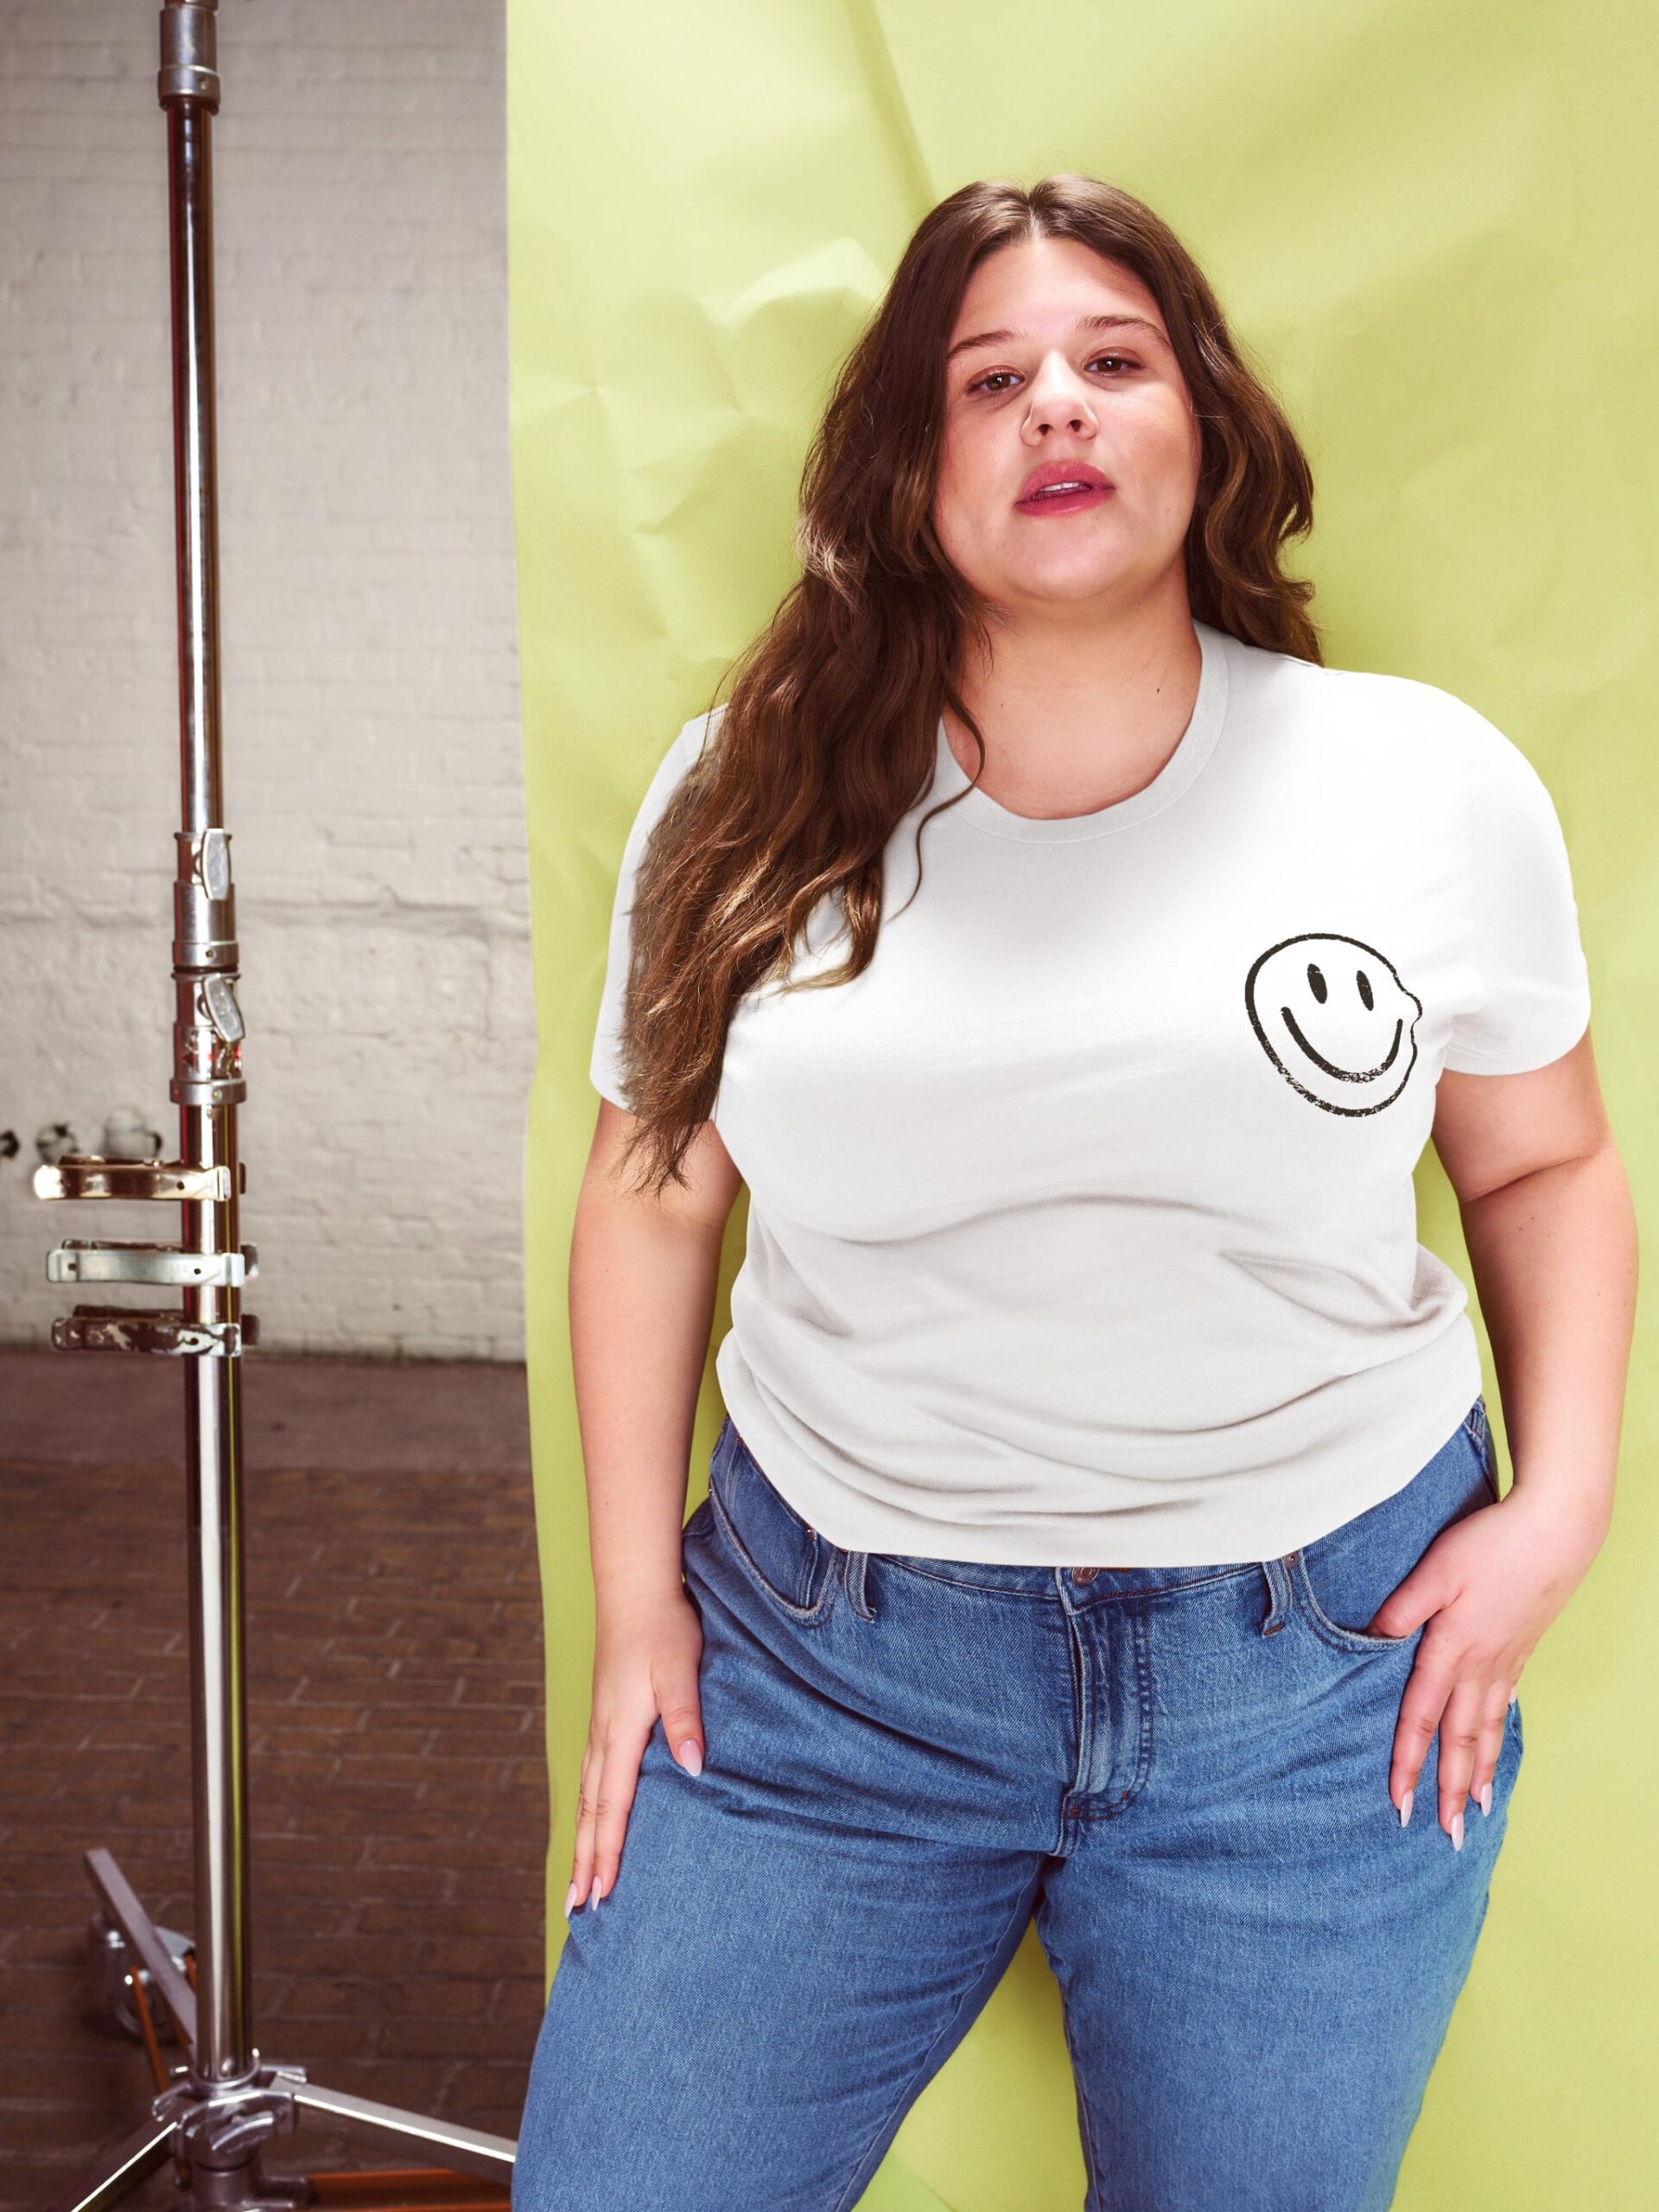 Remi Bader Doesn’t Want to Be Labeled Body Positive: “I’m Just Not There Yet”